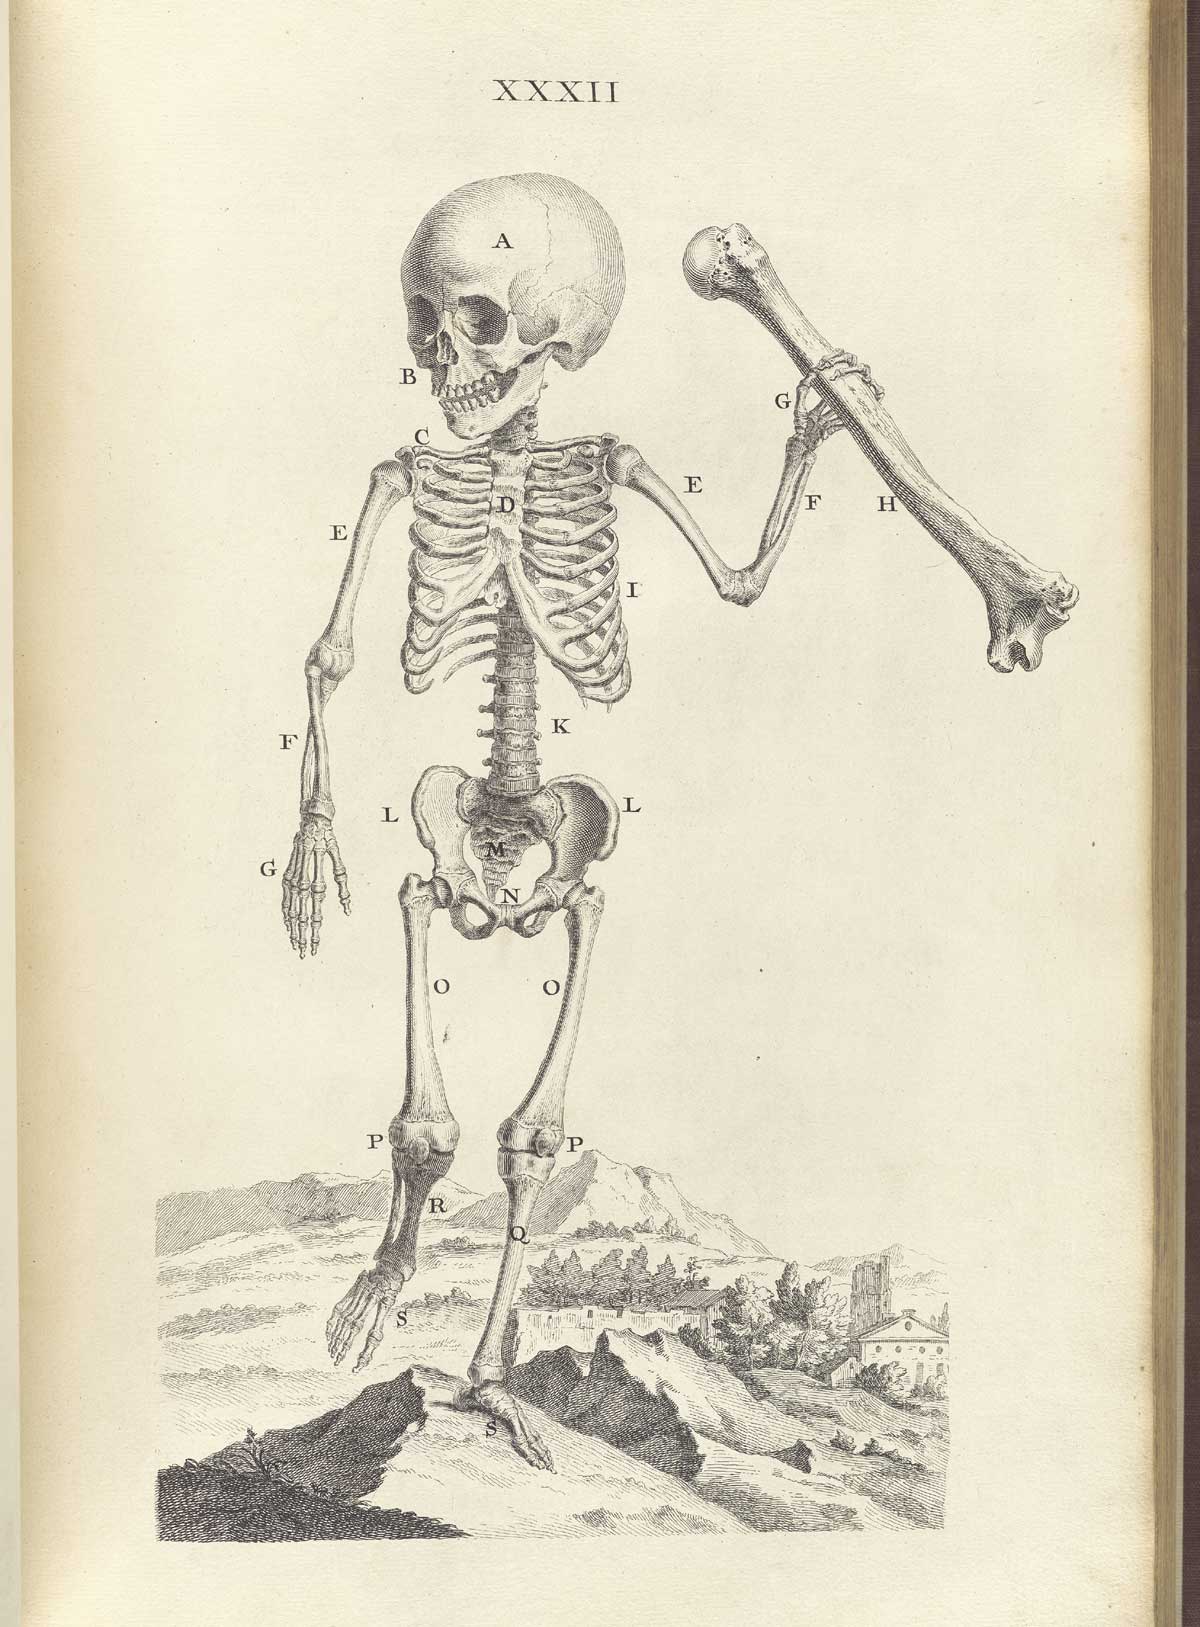 Engraving of a skeleton of a child one and a half years old standing in a pastoral setting with its left arm uplifted holding a thigh bone, from William Cheselden’s Osteographia, NLM Call no.: WZ 260 C499o 1733.